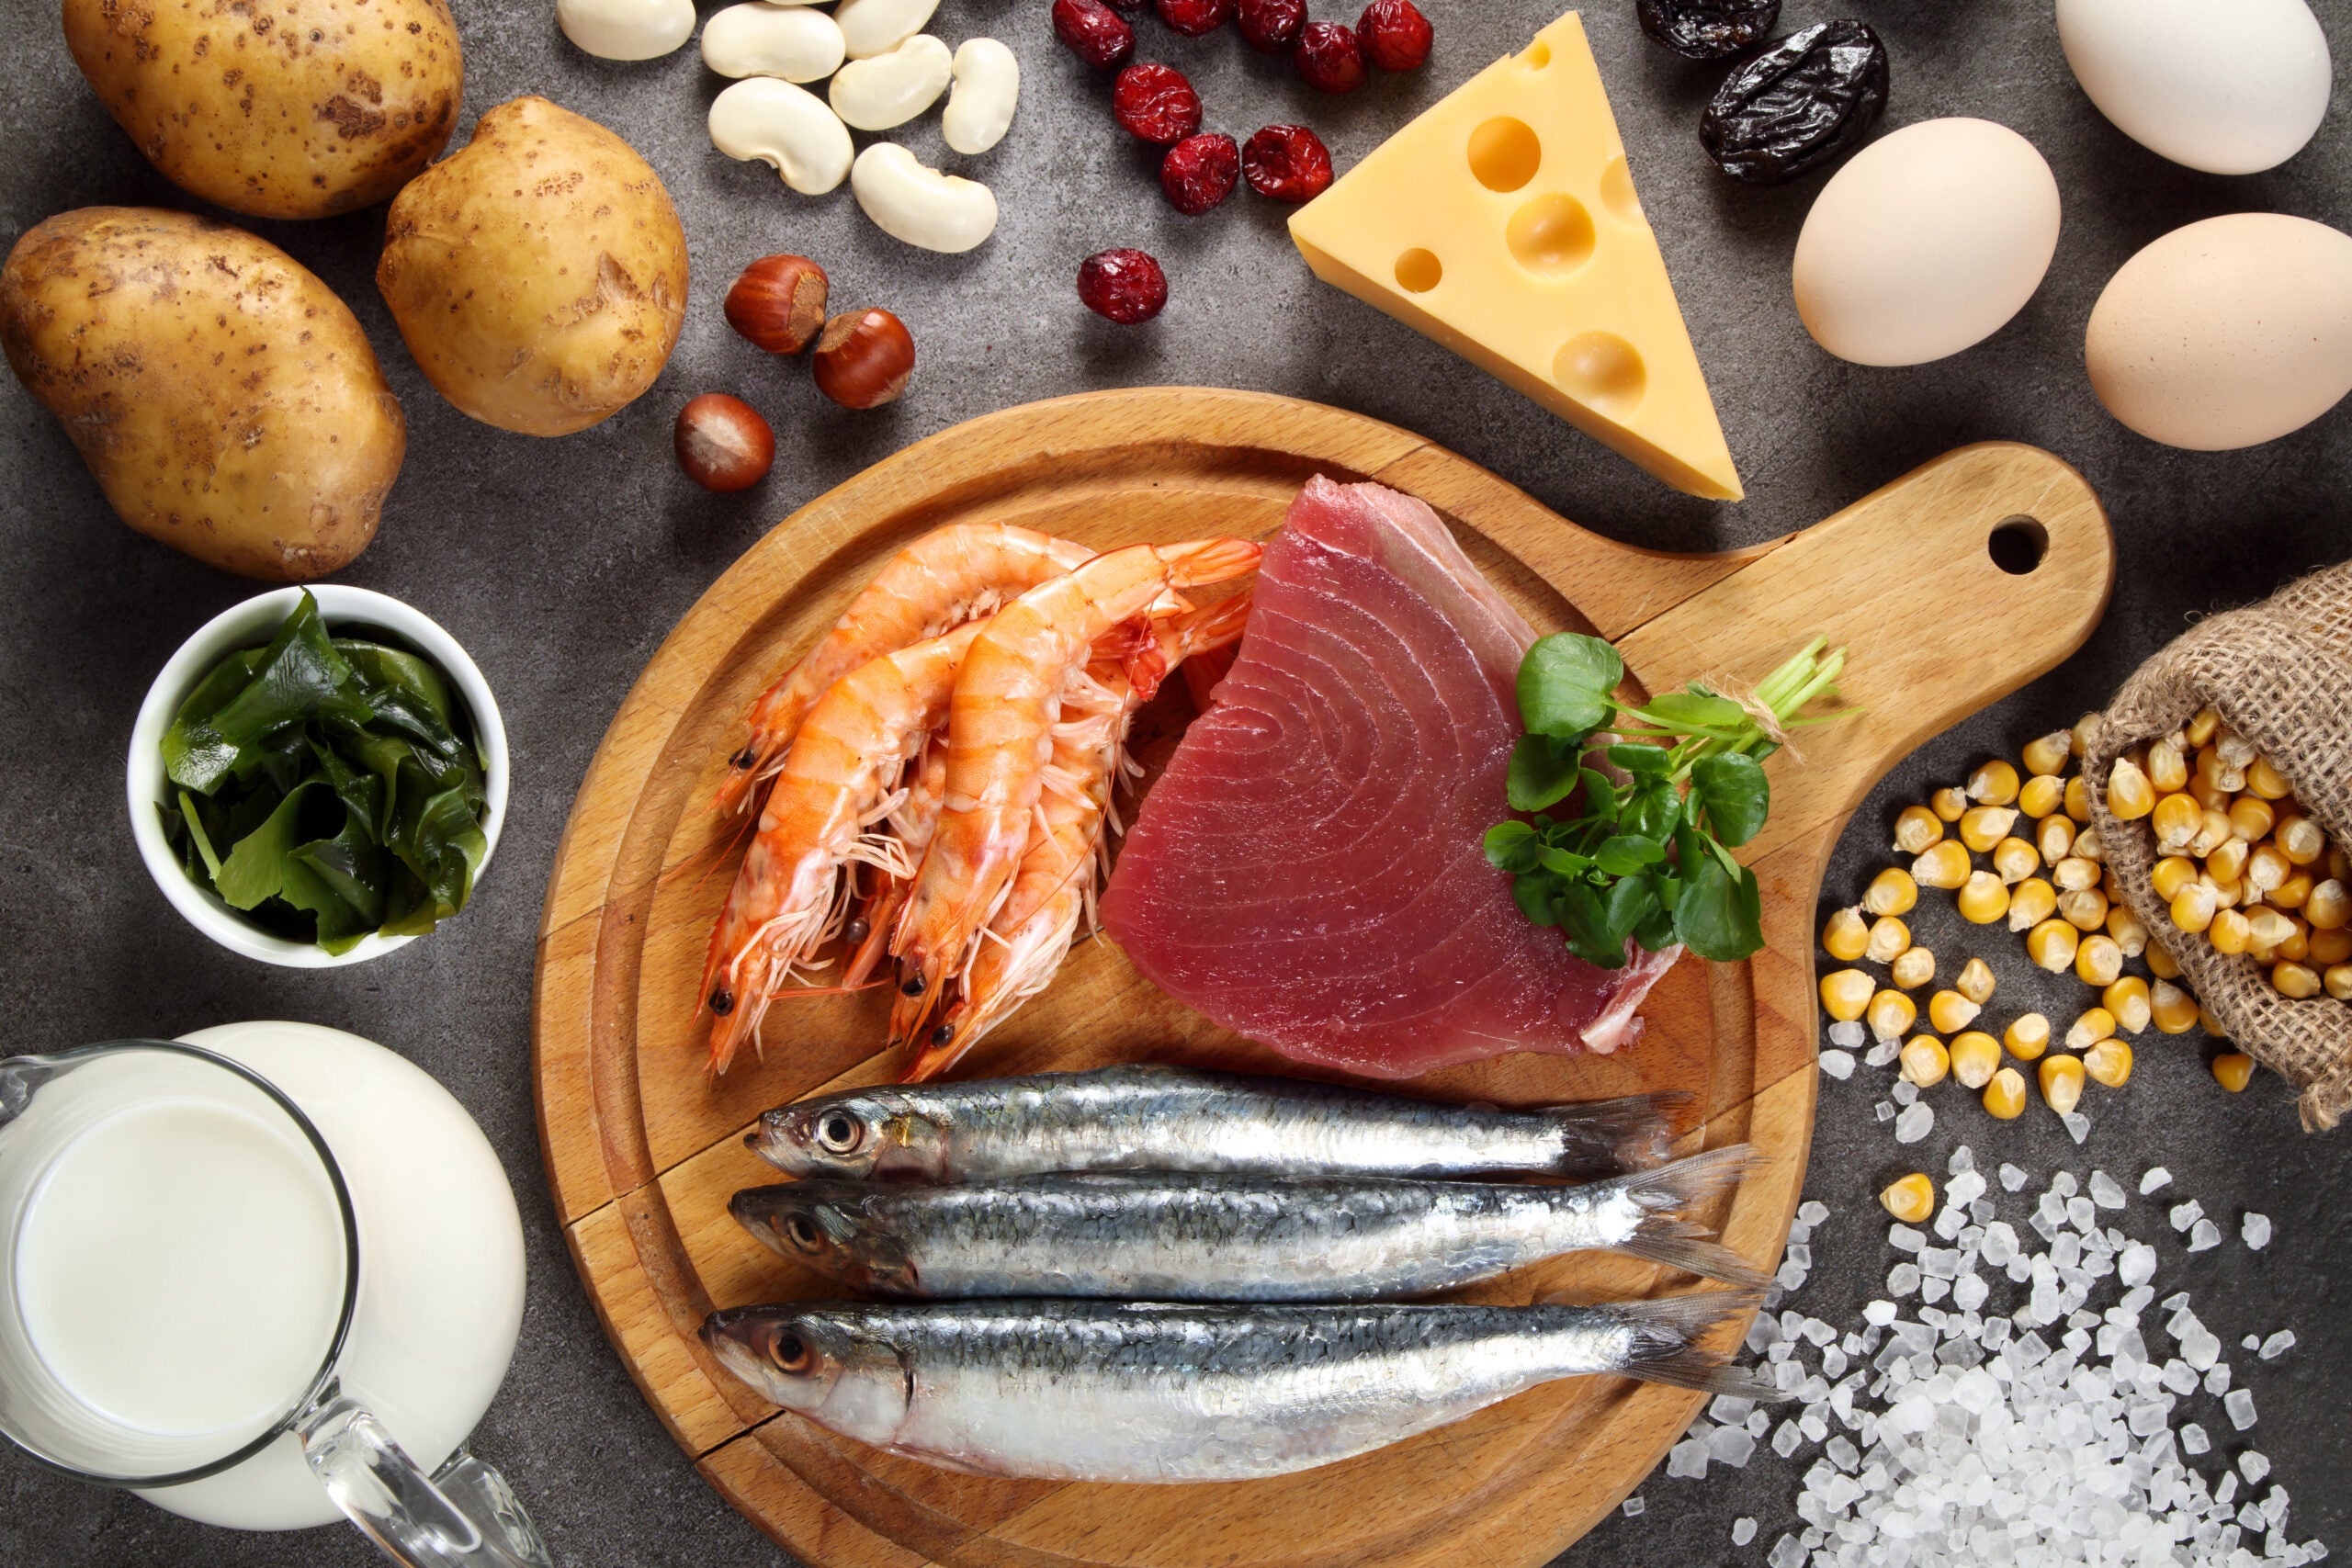 foods containing iodine, including a variety of fish, shellfish, iodized salt, milk, seaweed, nuts, seeds, potatoes, beans, eggs and a variety of dairy products including milk, cheese and yogurt.